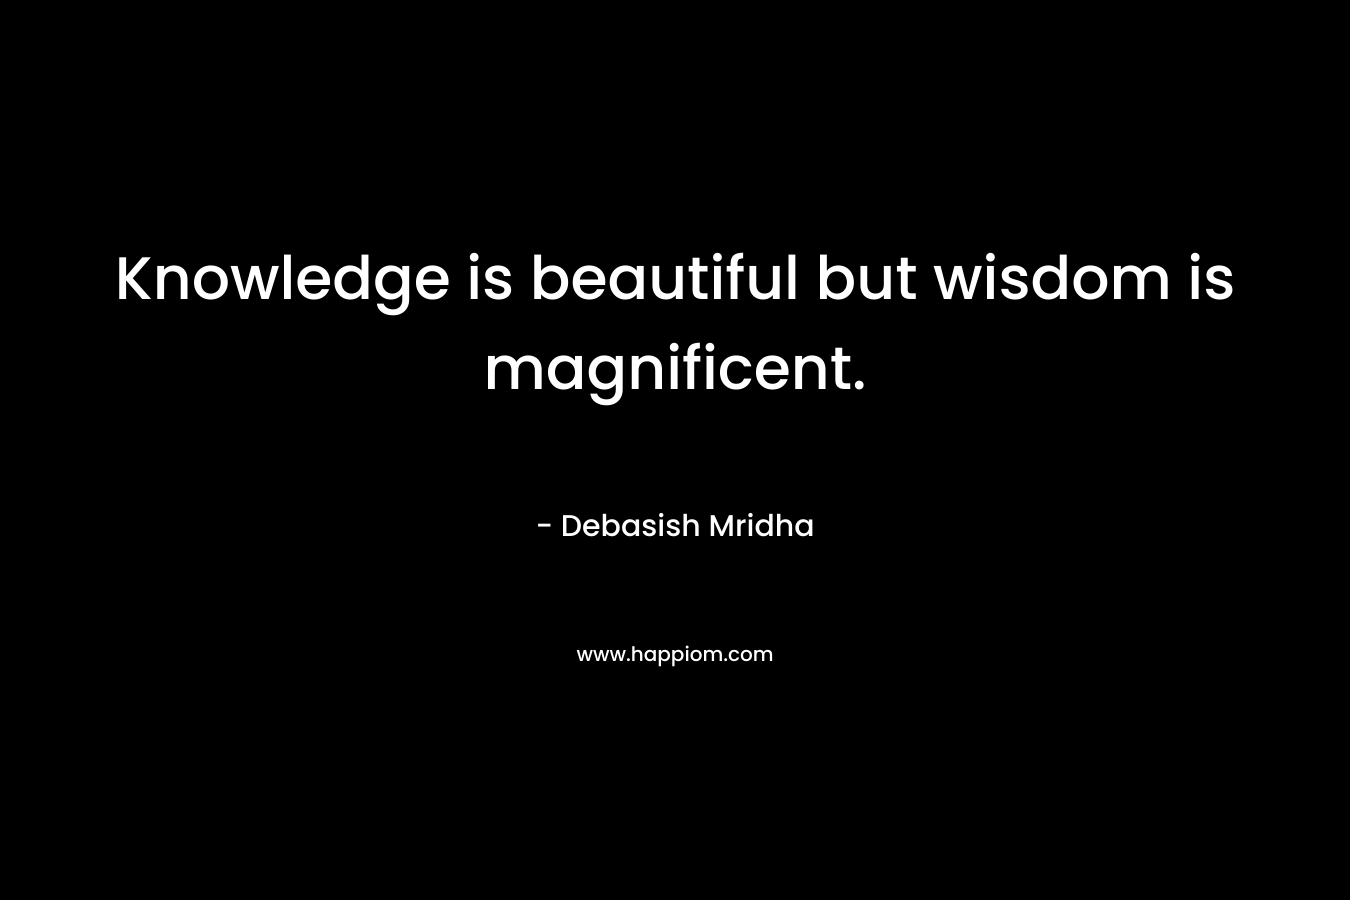 Knowledge is beautiful but wisdom is magnificent.